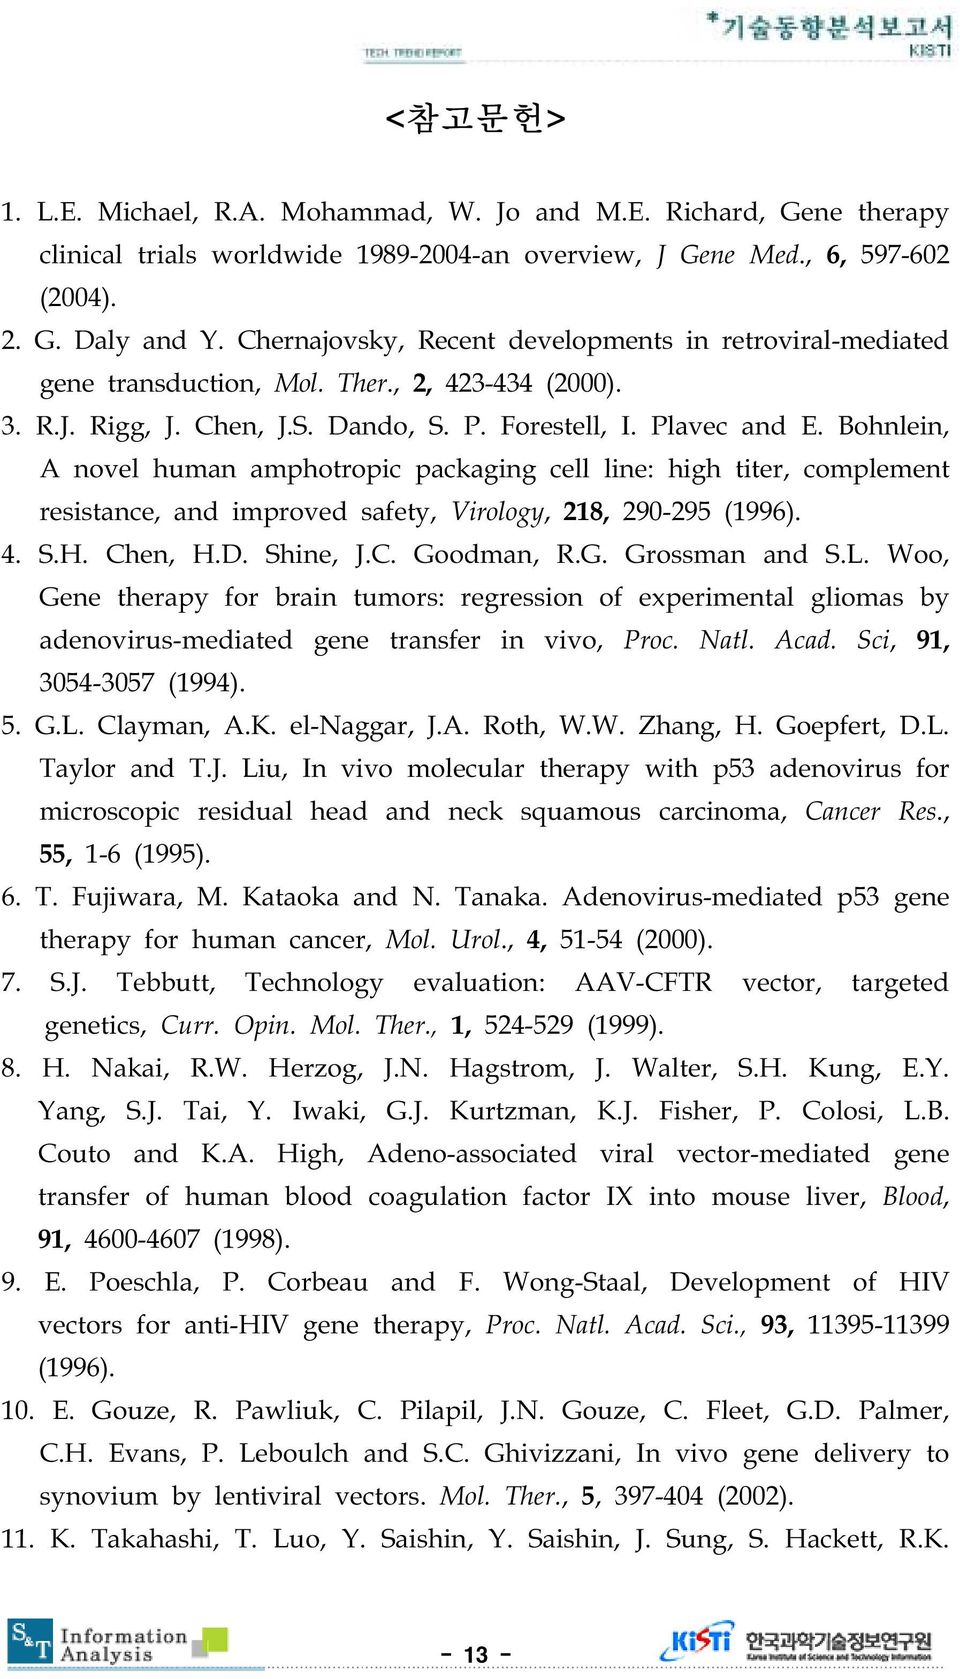 Bohnlein, A novel human amphotropic packaging cell line: high titer, complement resistance, and improved safety, Virology, 218, 290-295 (1996). 4. S.H. Chen, H.D. Shine, J.C. Goodman, R.G. Grossman and S.